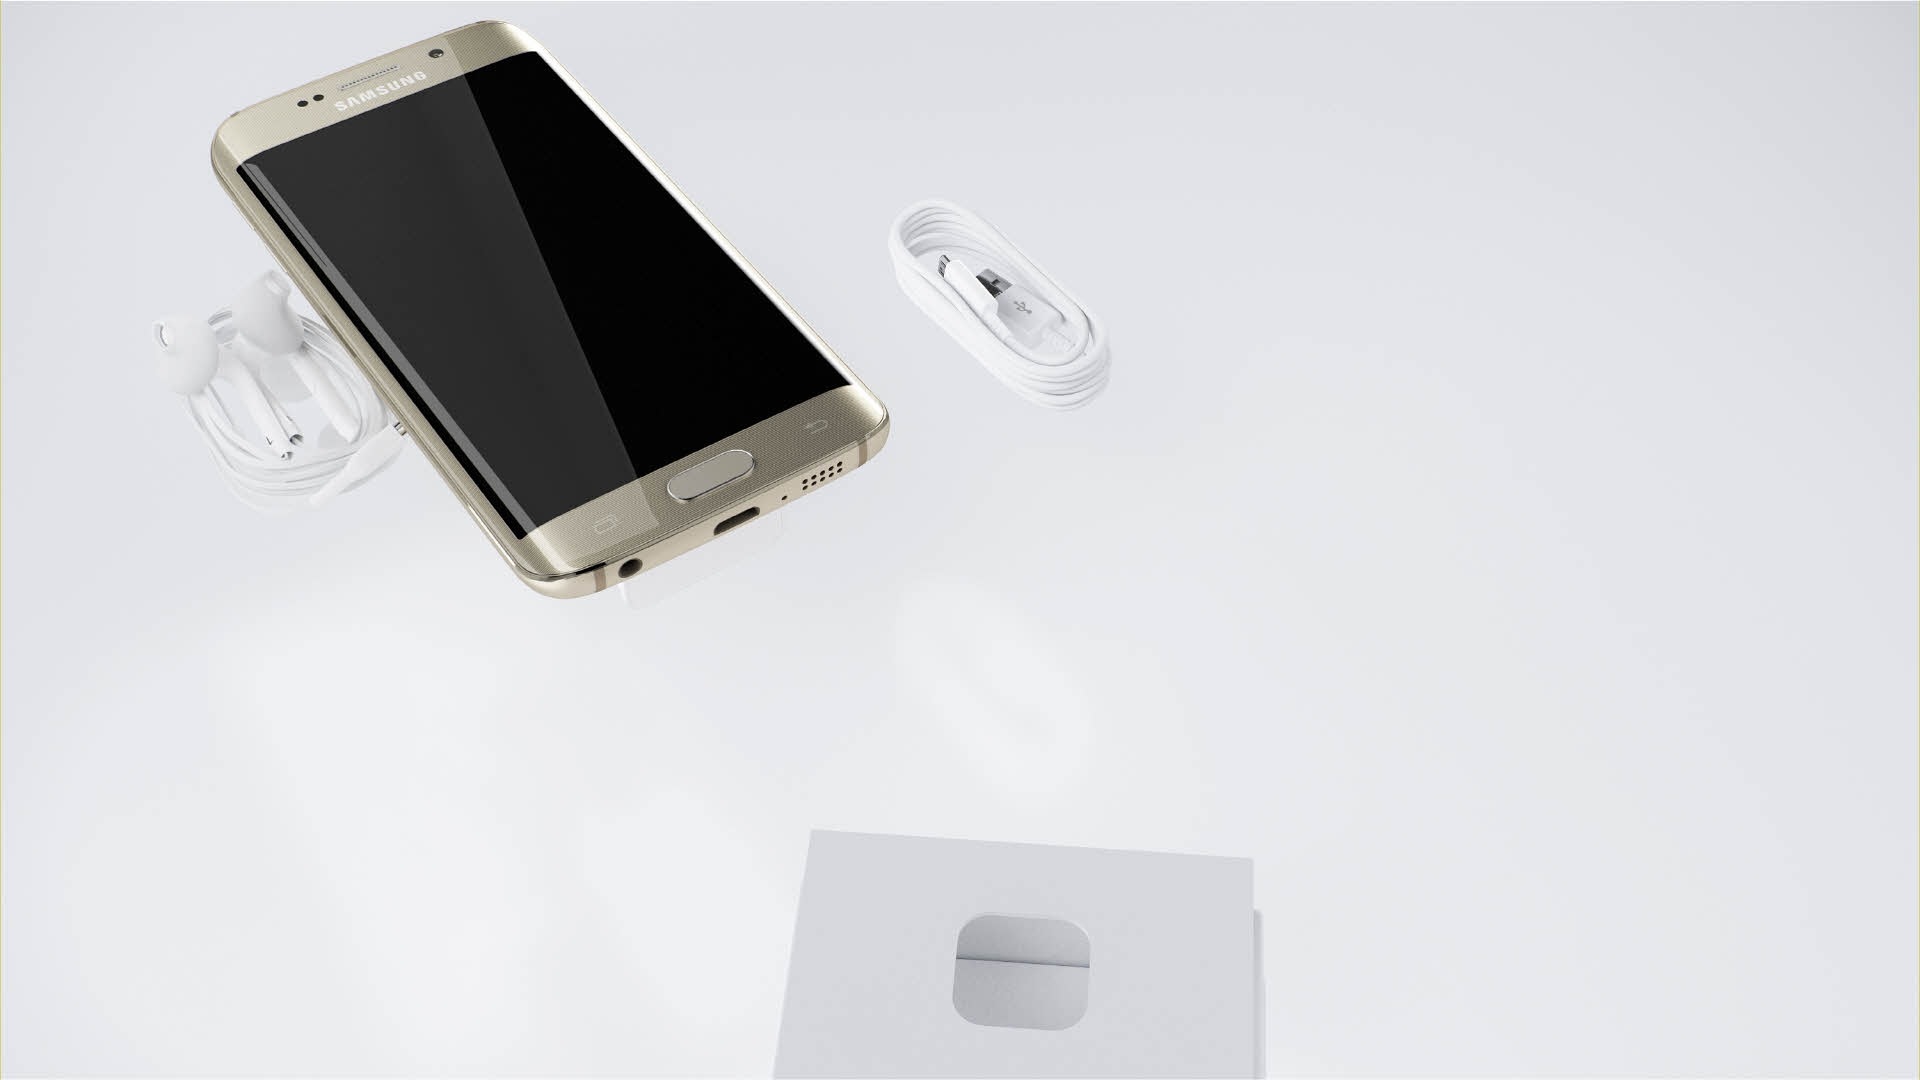 The animated sequence in which the Galaxy S6 edge comes out of the white box.